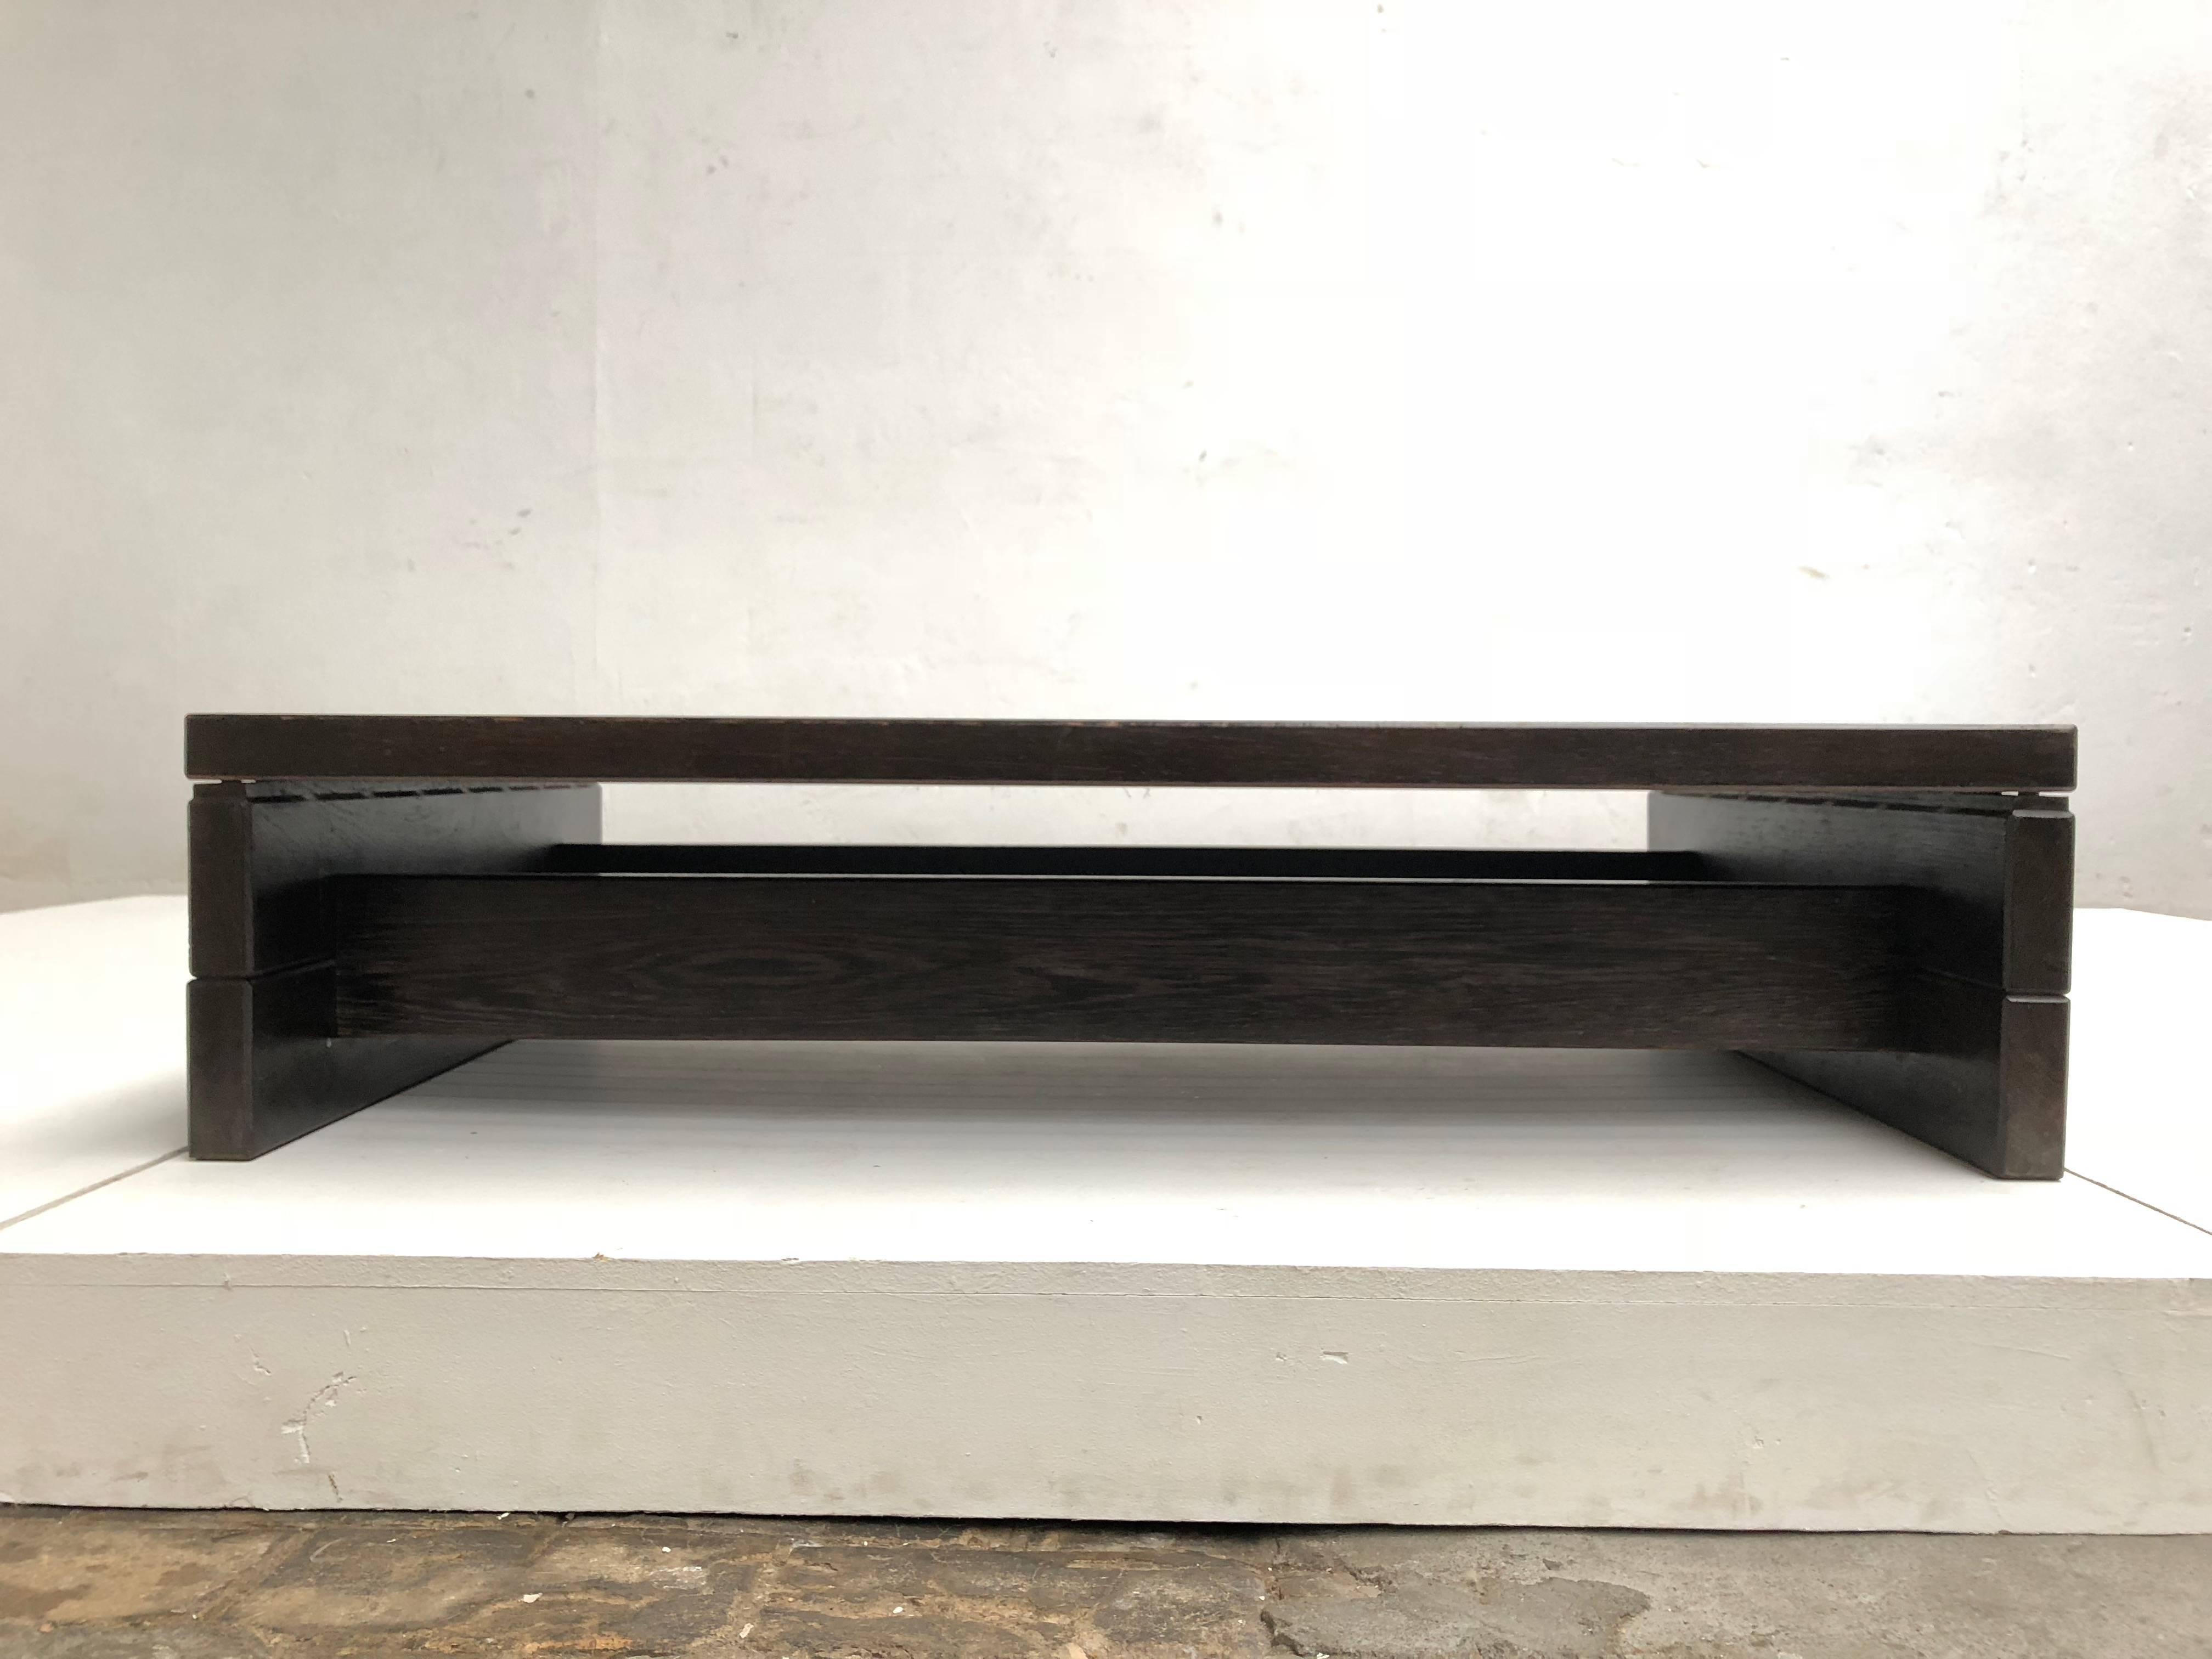 This high quality coffee table or low bench is made from very heavy solid wenge tropical hardwood

Most likely custom-made in the Netherlands during the 1960s when this type of wood was very popular in the Dutch interiors and furniture design,